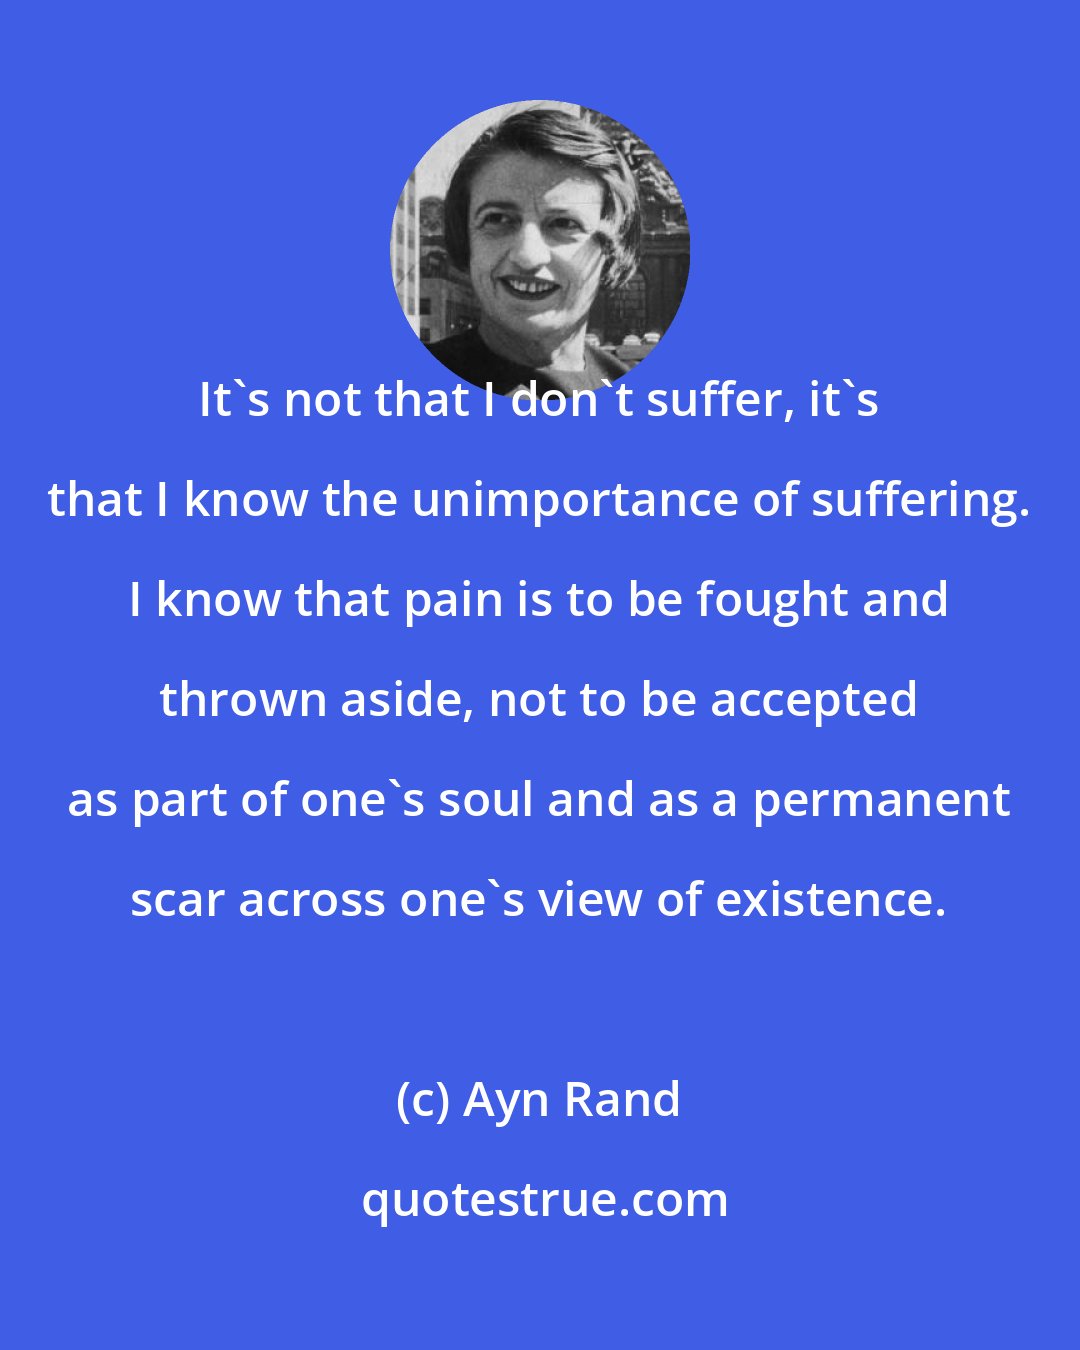 Ayn Rand: It's not that I don't suffer, it's that I know the unimportance of suffering. I know that pain is to be fought and thrown aside, not to be accepted as part of one's soul and as a permanent scar across one's view of existence.